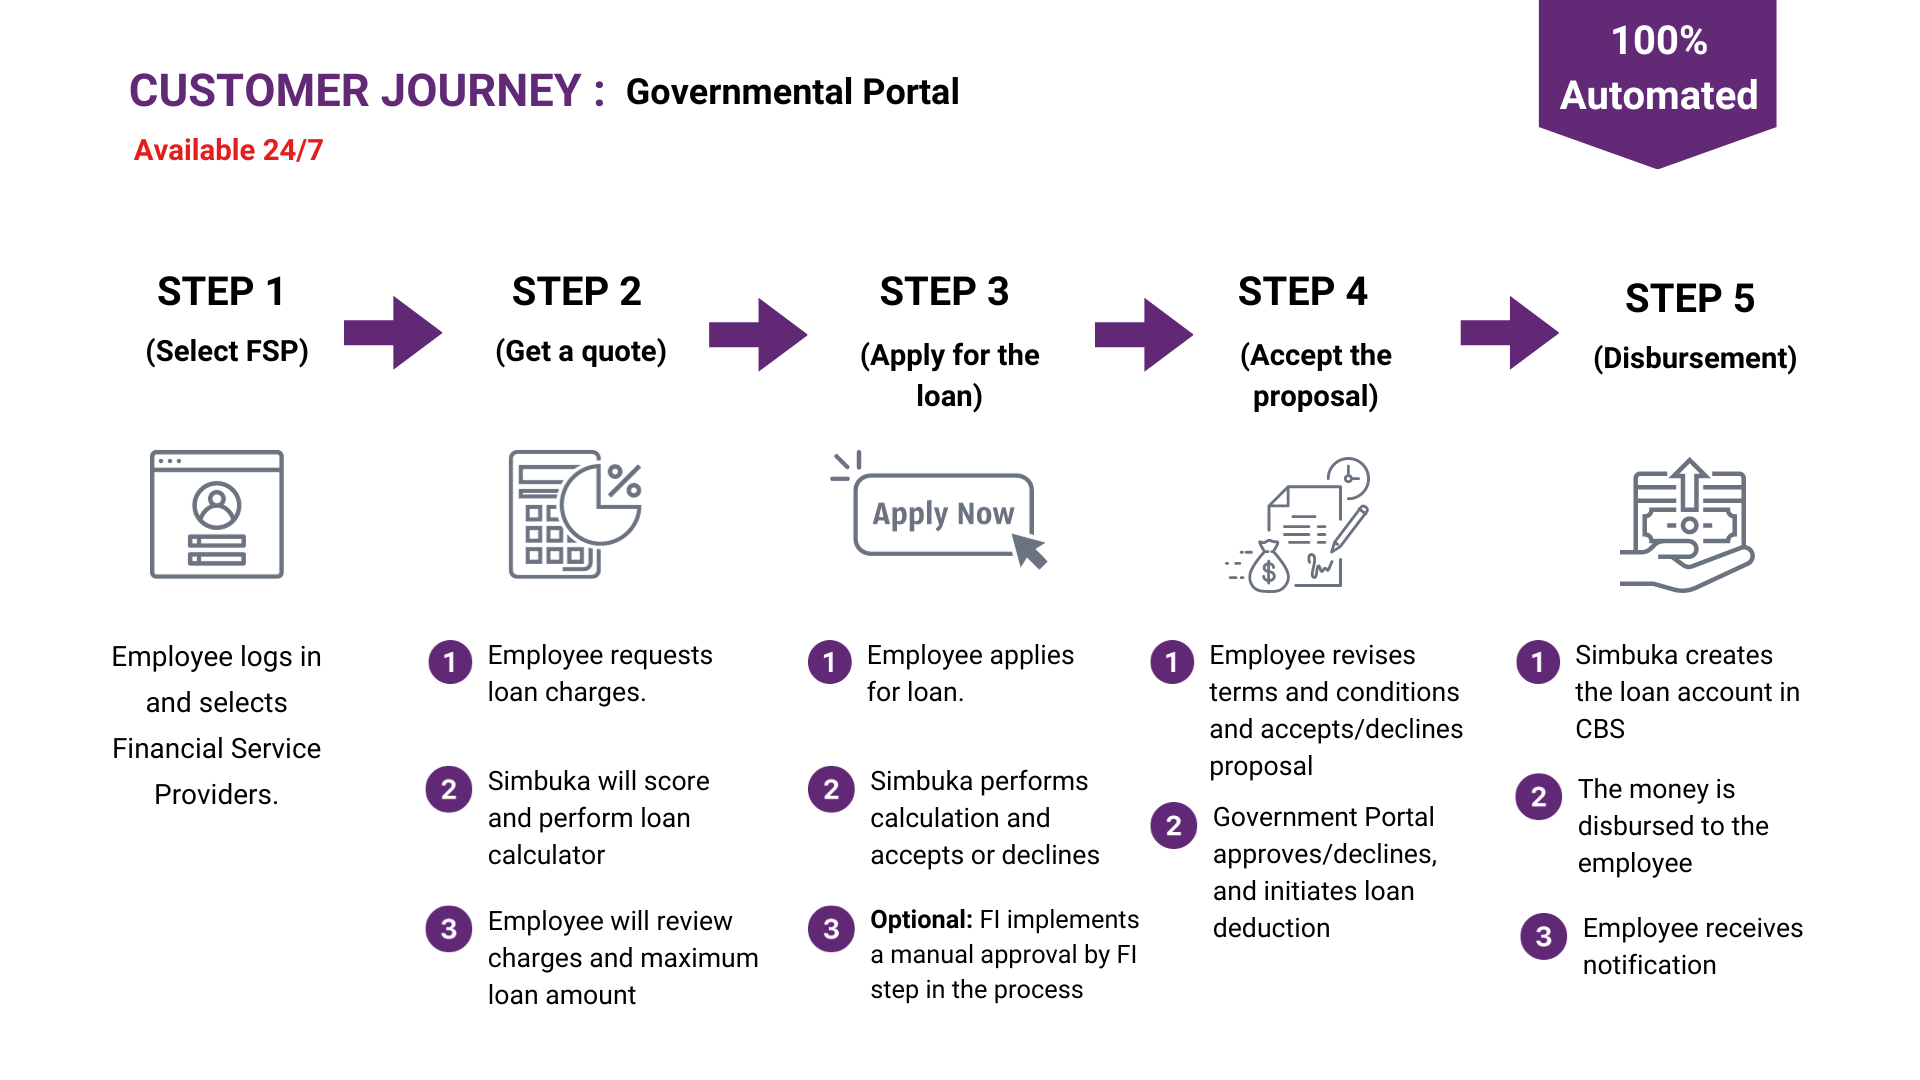 The customer journey of using the Tanzanian governmental portal